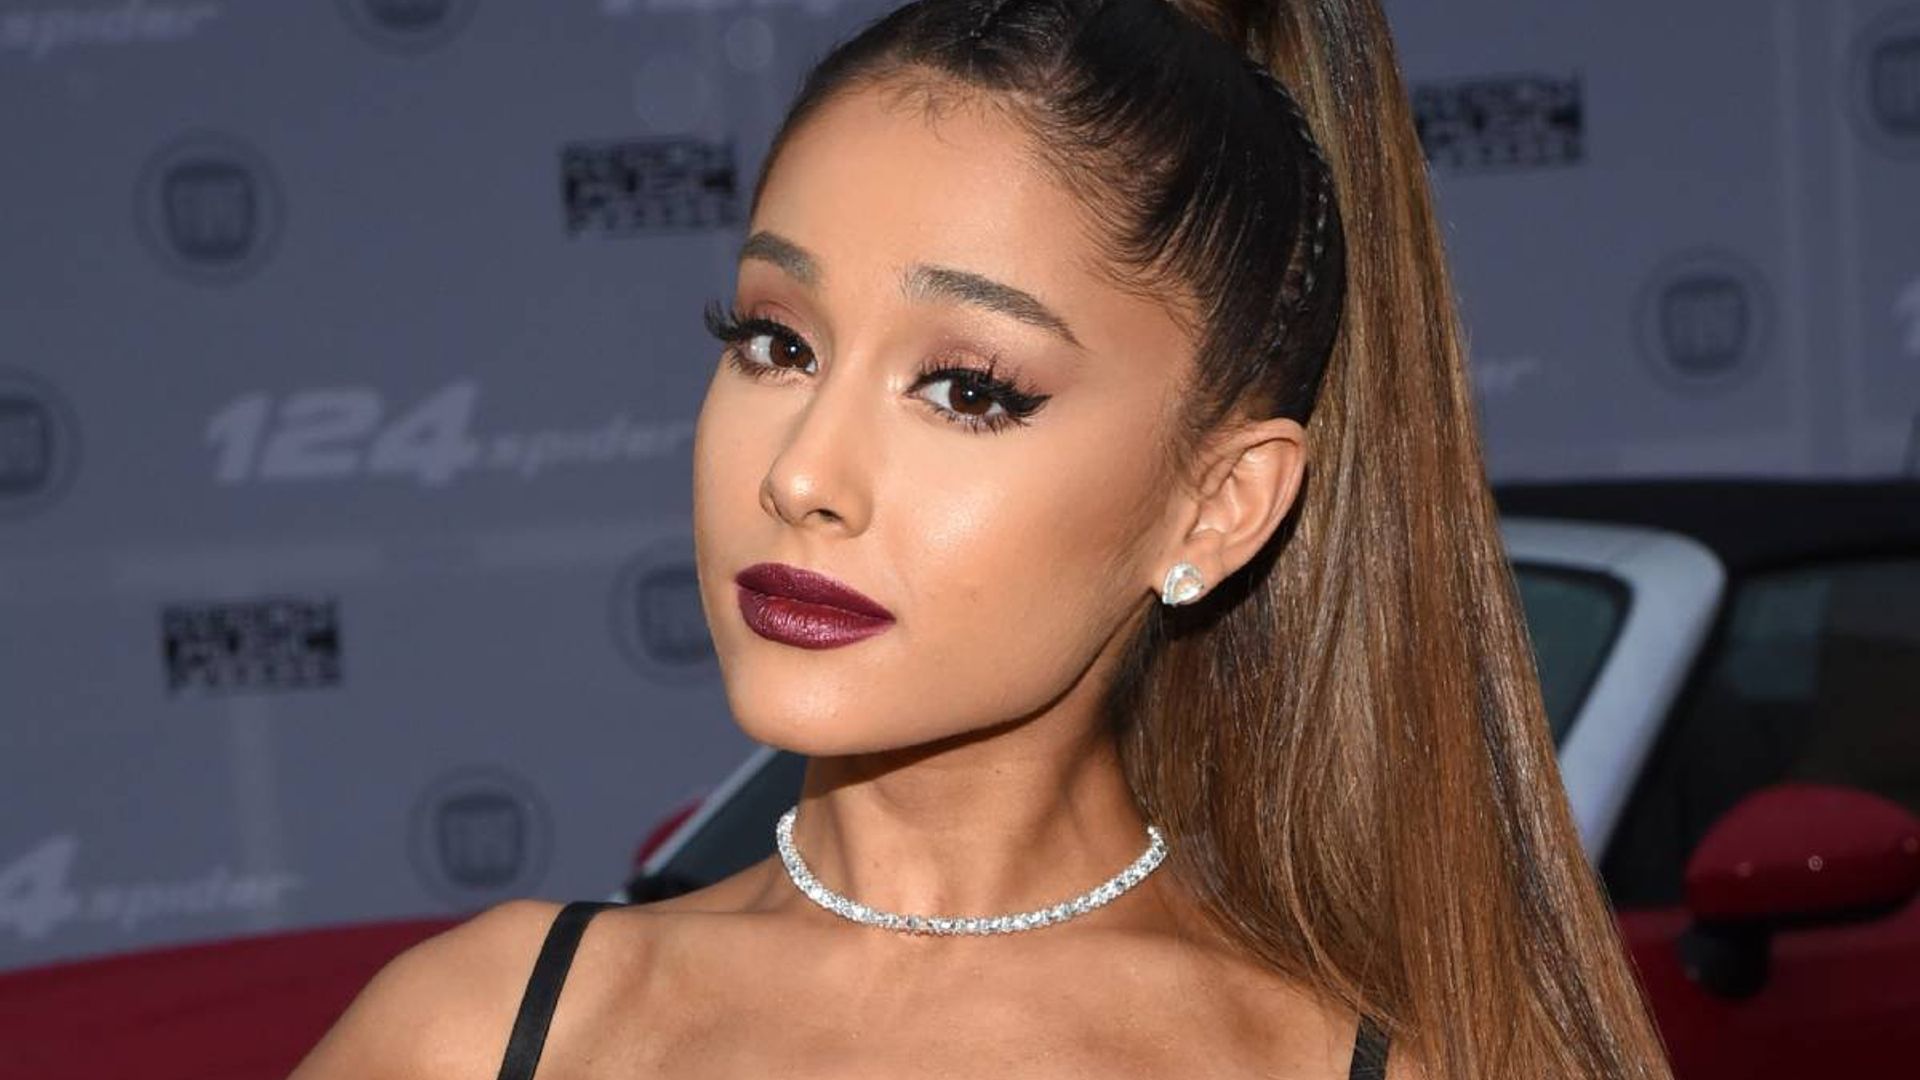 Ariana Grande shares rare message to fans ahead of exciting The Voice announcement